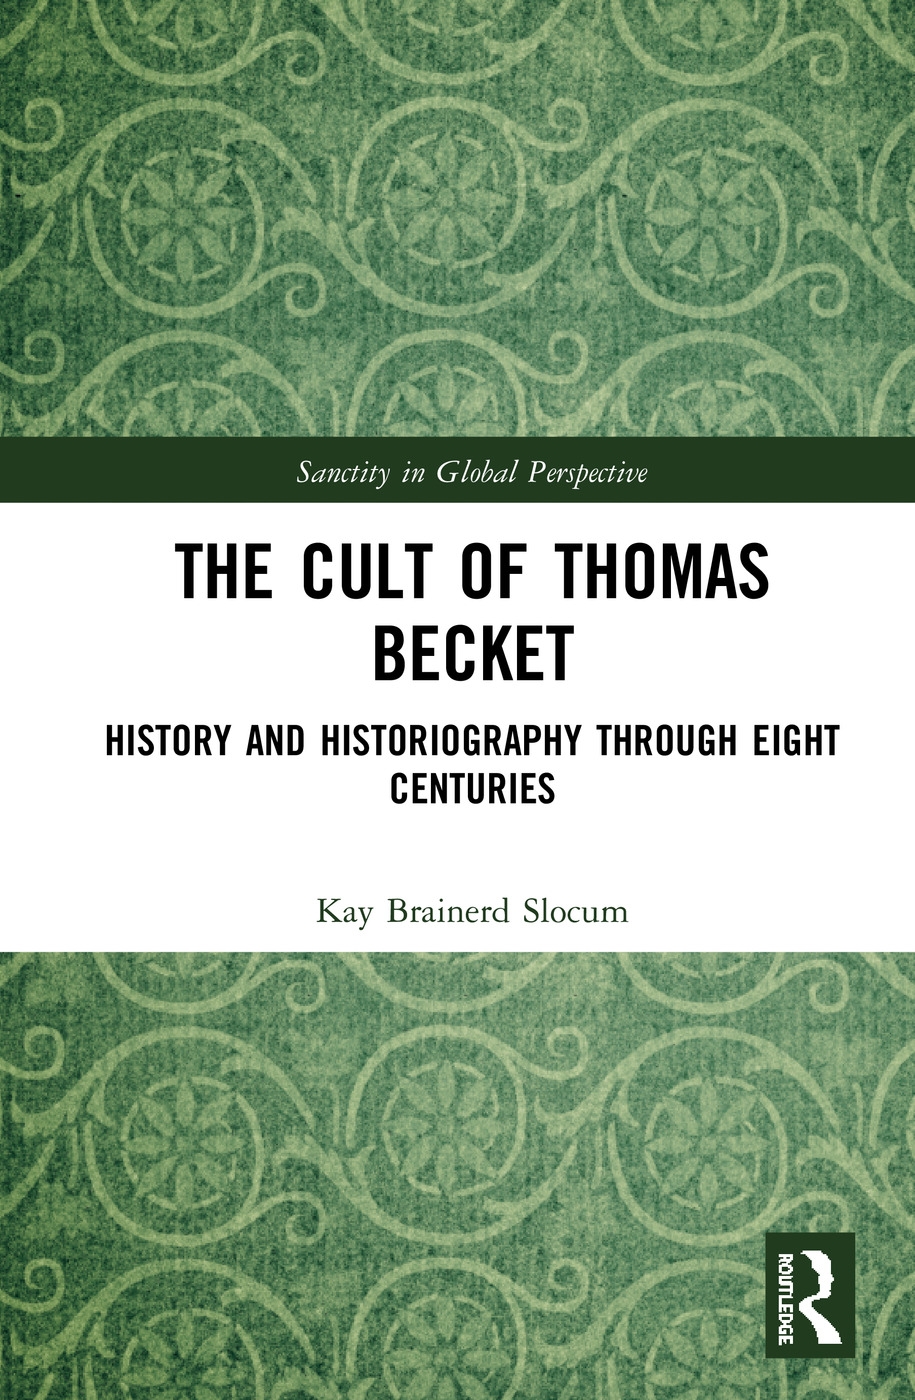 The Cult of Thomas Becket: History and Historiography Through Eight Centuries